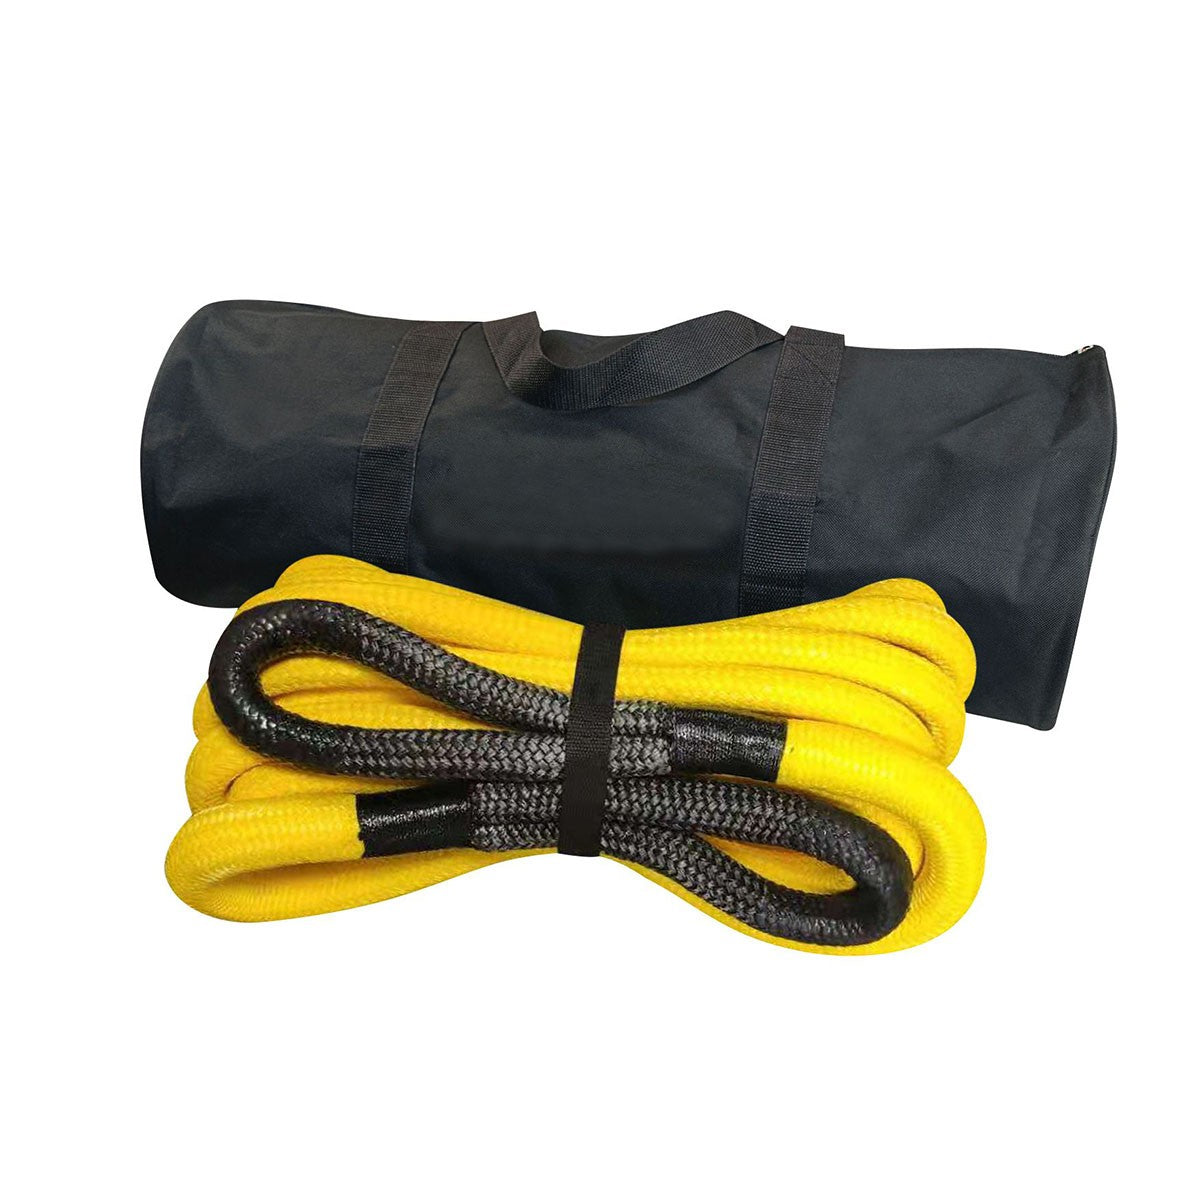 9M KINETIC RECOVERY ROPE WITH CARRY BAG 13800KGS